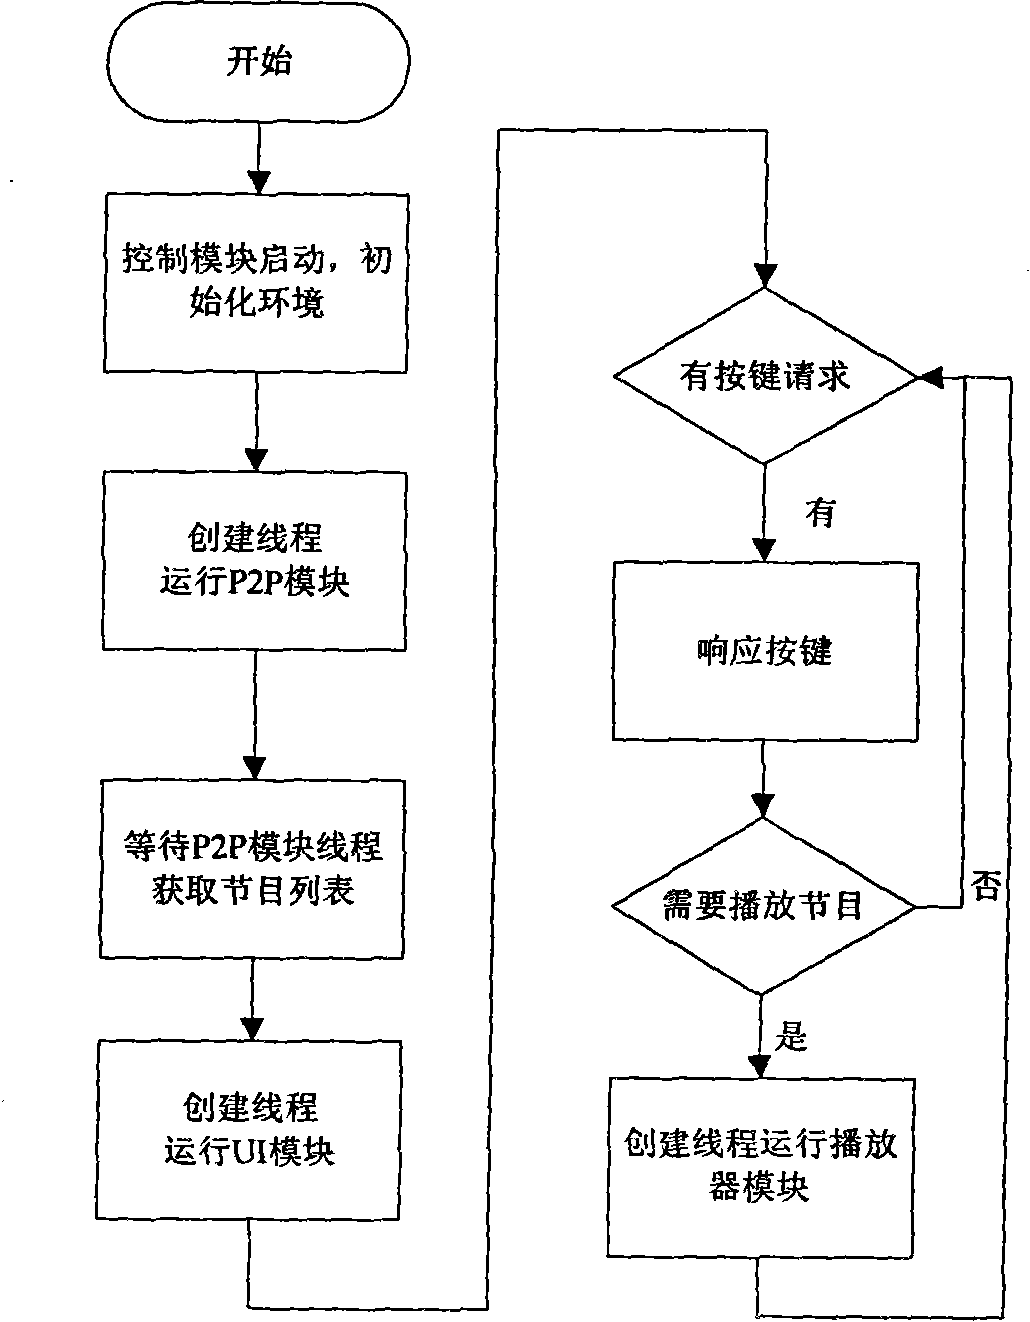 DM6446-based embedded P2P live streaming media system and working method thereof